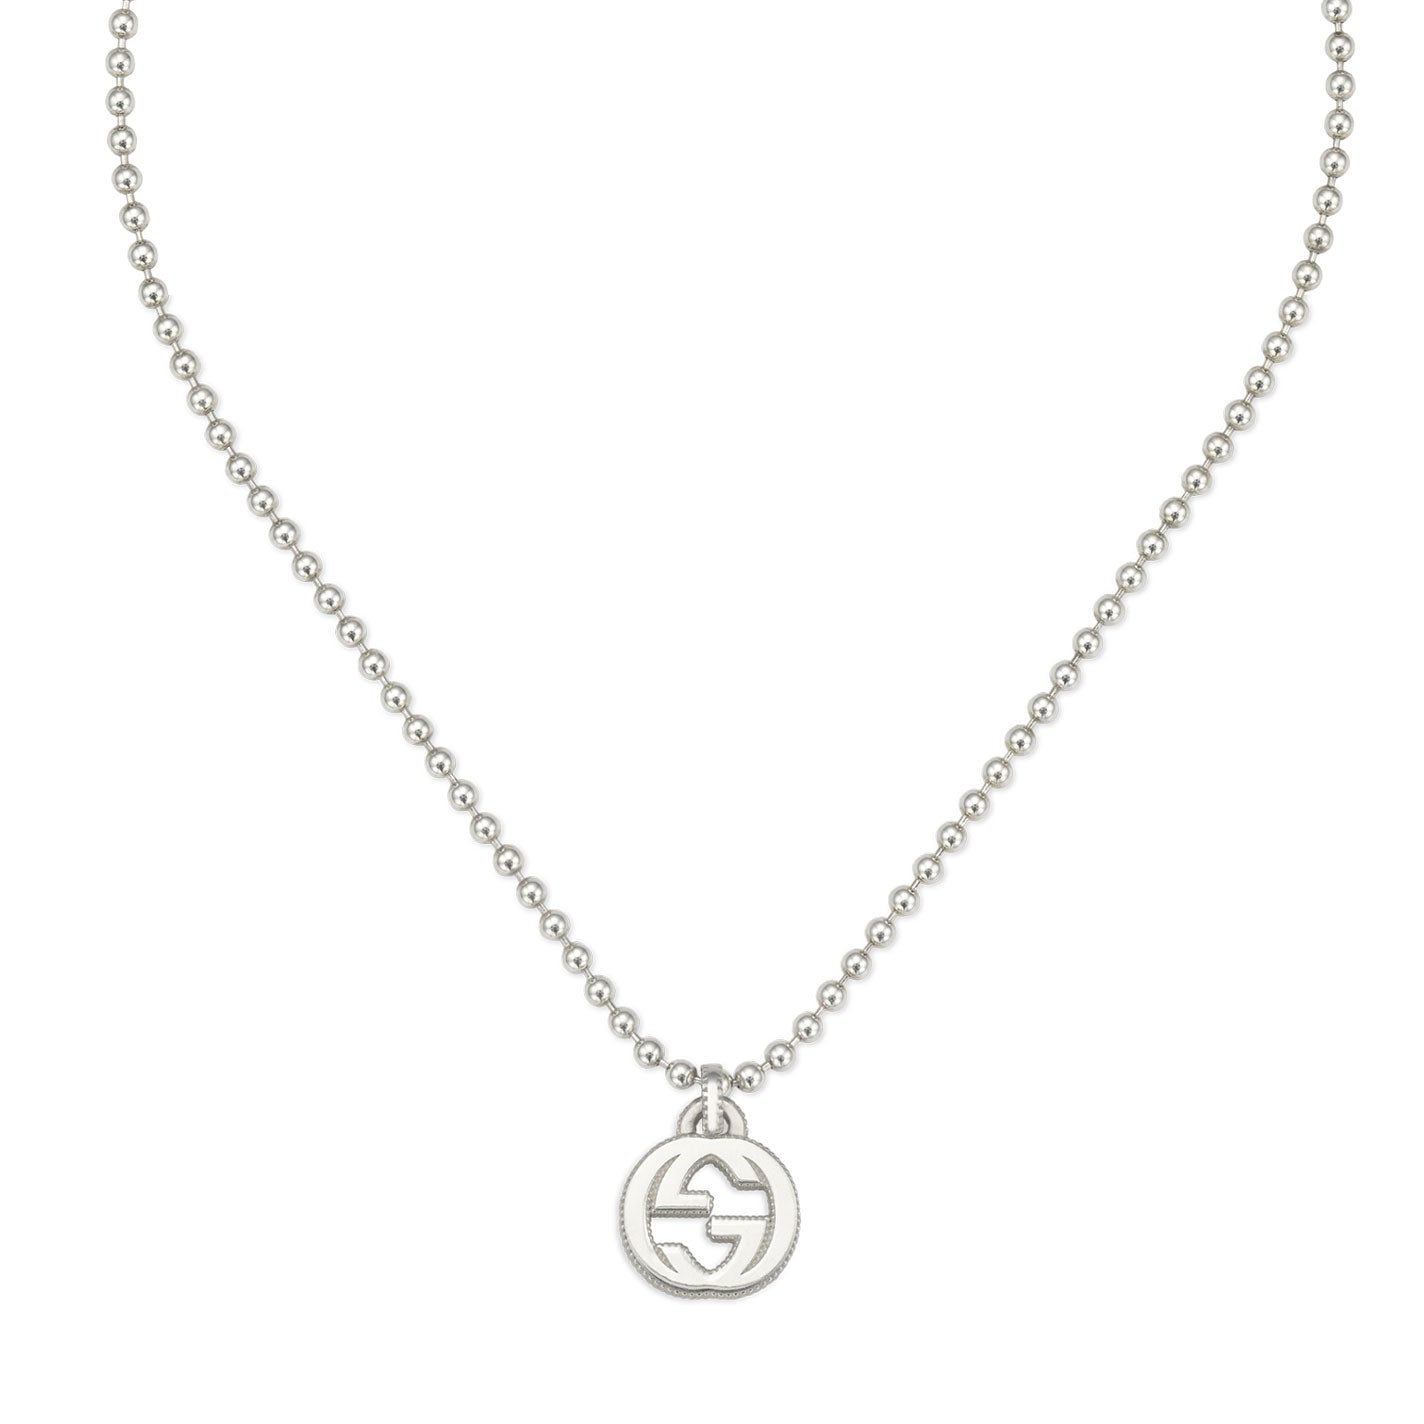 Gucci Interlocking G Sterling Sterling Silver Necklace Pendant